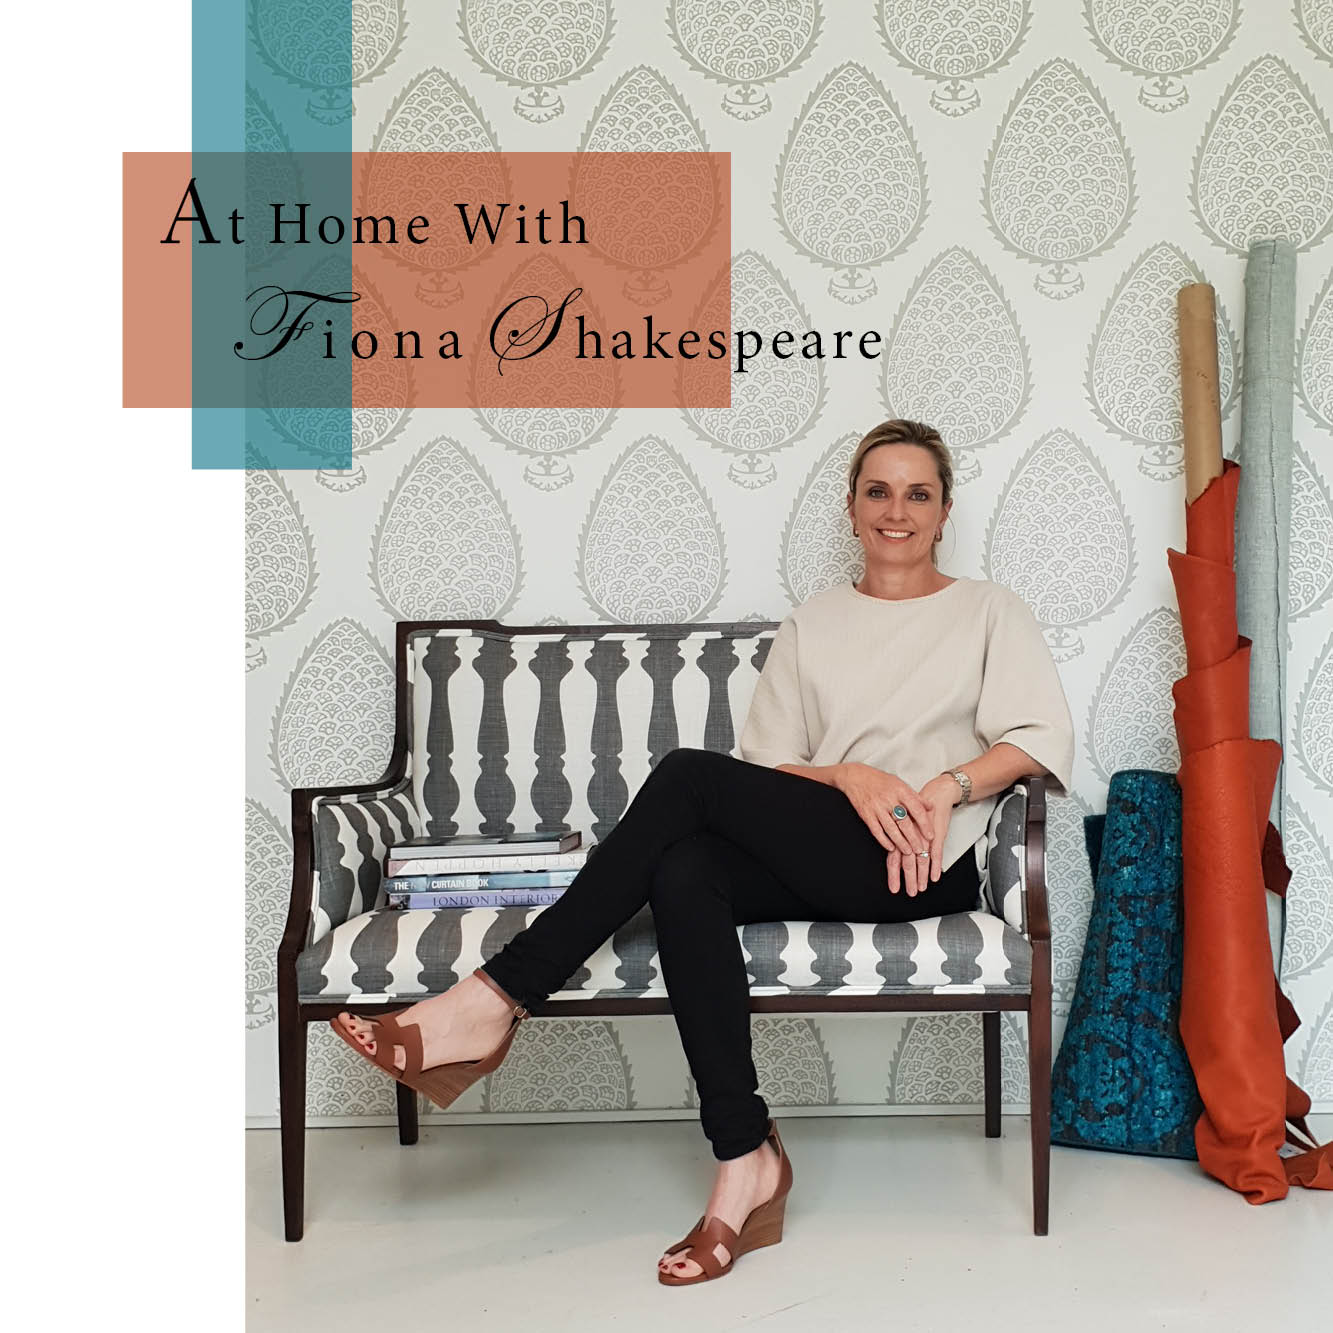 At Home With Fiona Shakespeare